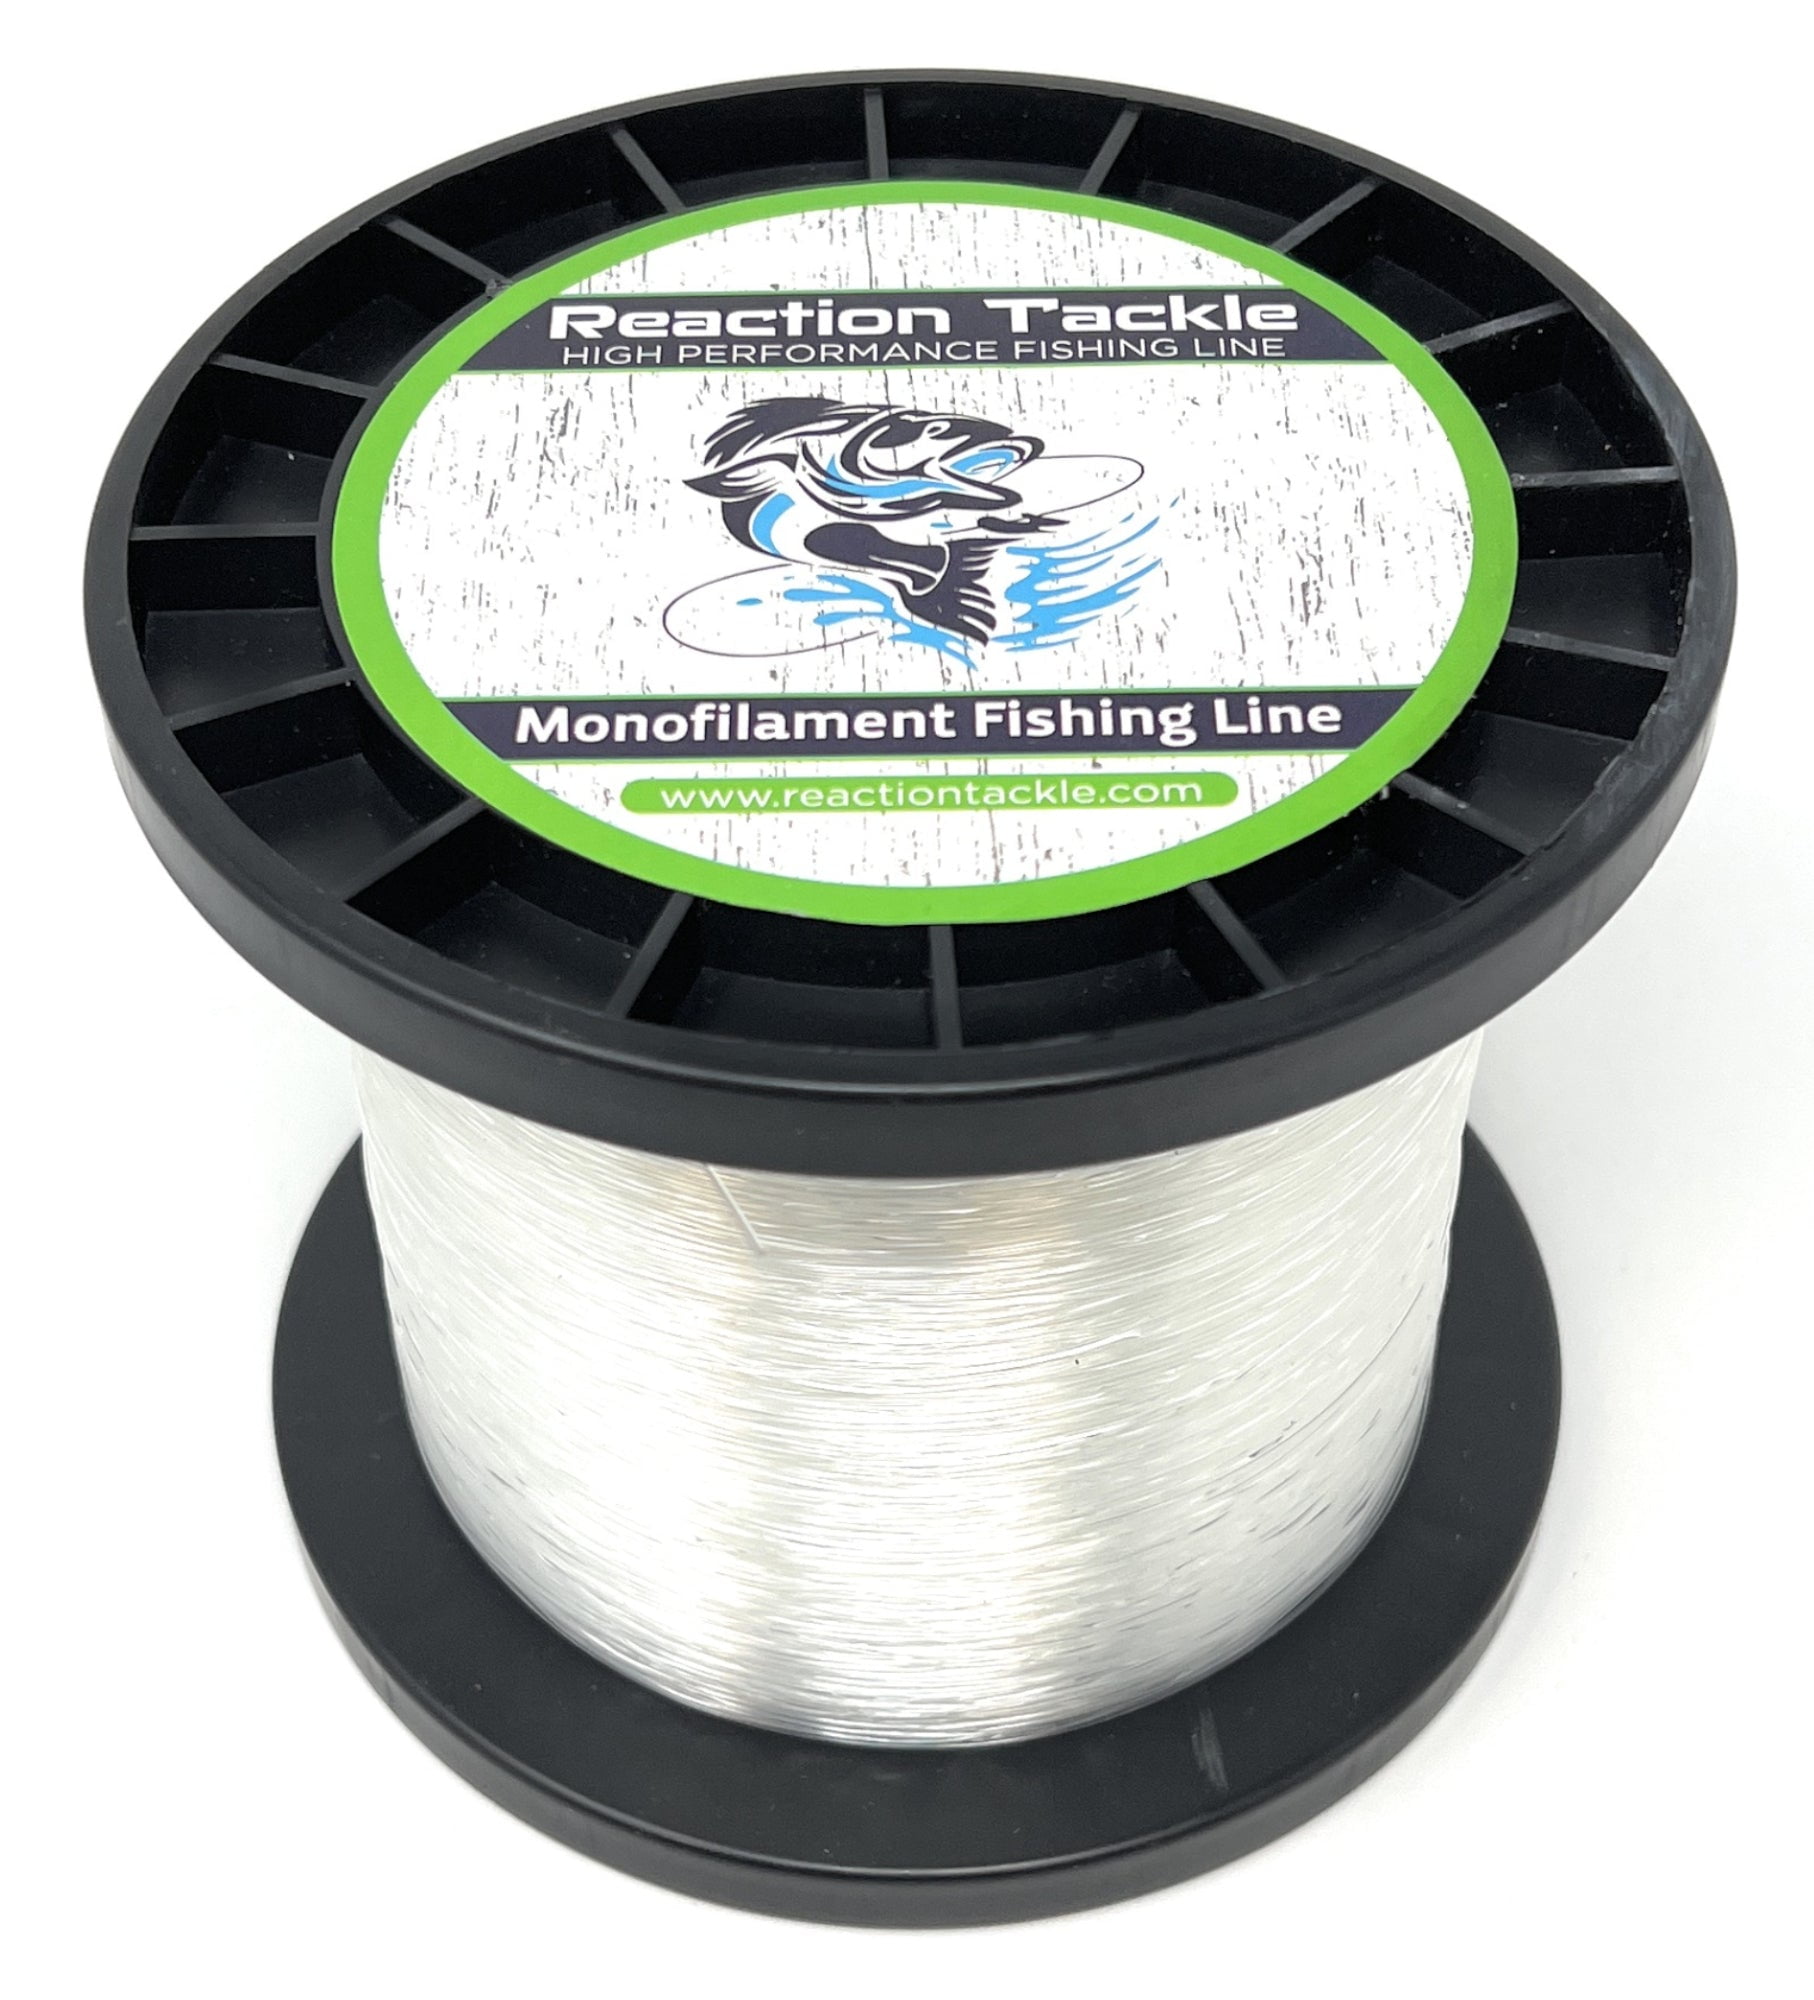 KastKing World's Premium Monofilament Fishing Line - Paralleled Roll Track  - Strong and Abrasion Resistant Mono Line - Superior Nylon Material Fishing  Line - 2015 ICAST Award Winning Manufacturer 